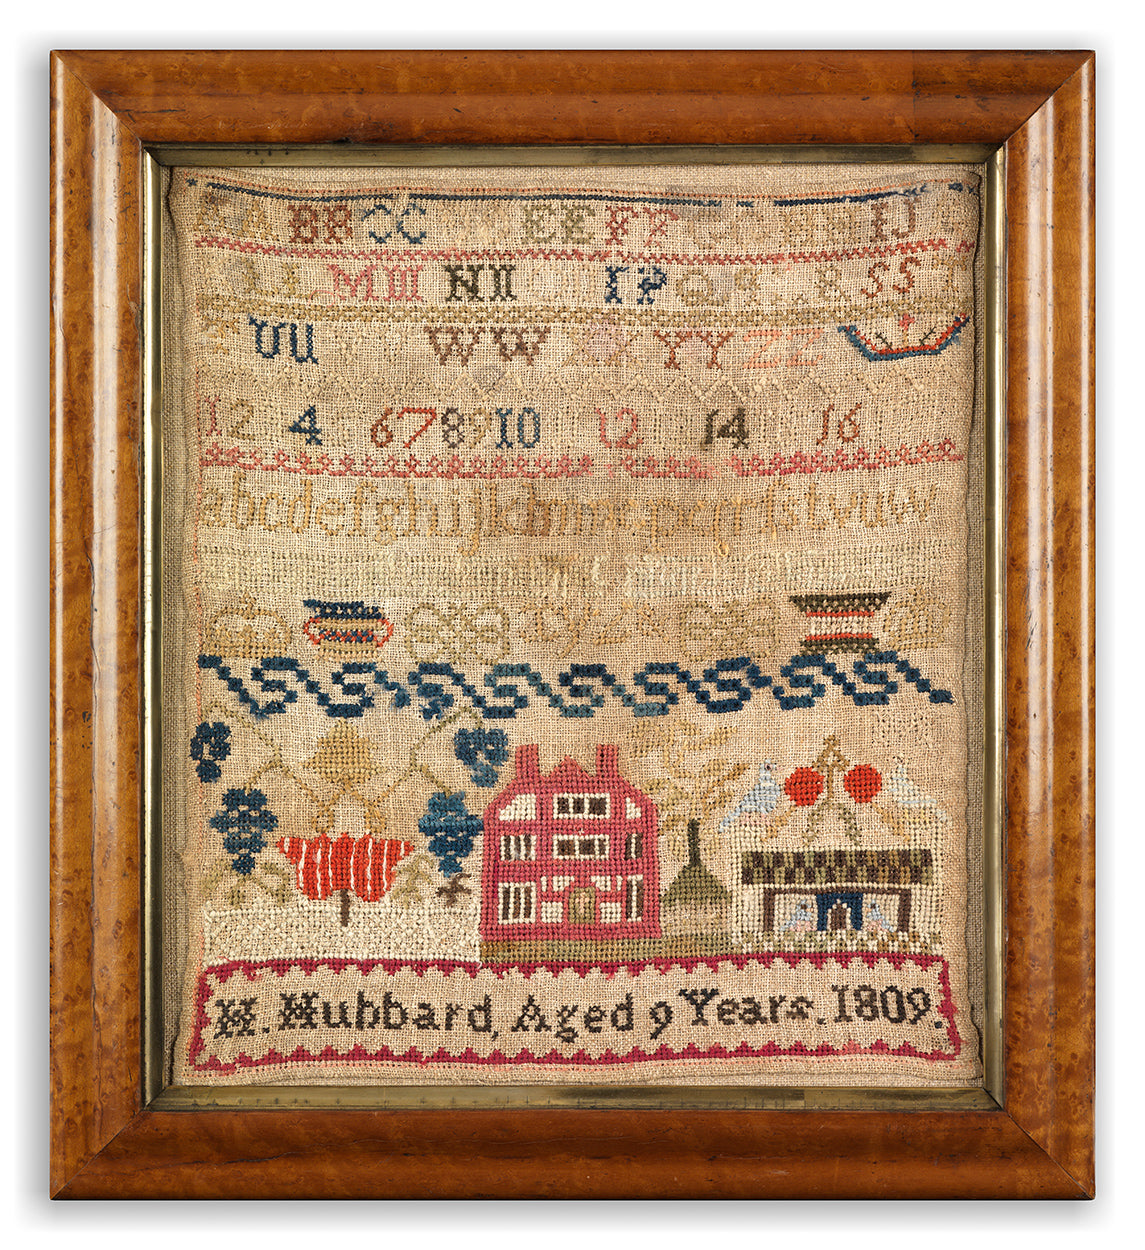 A Colourful Schoolgirl Sampler by "H Hubbard"